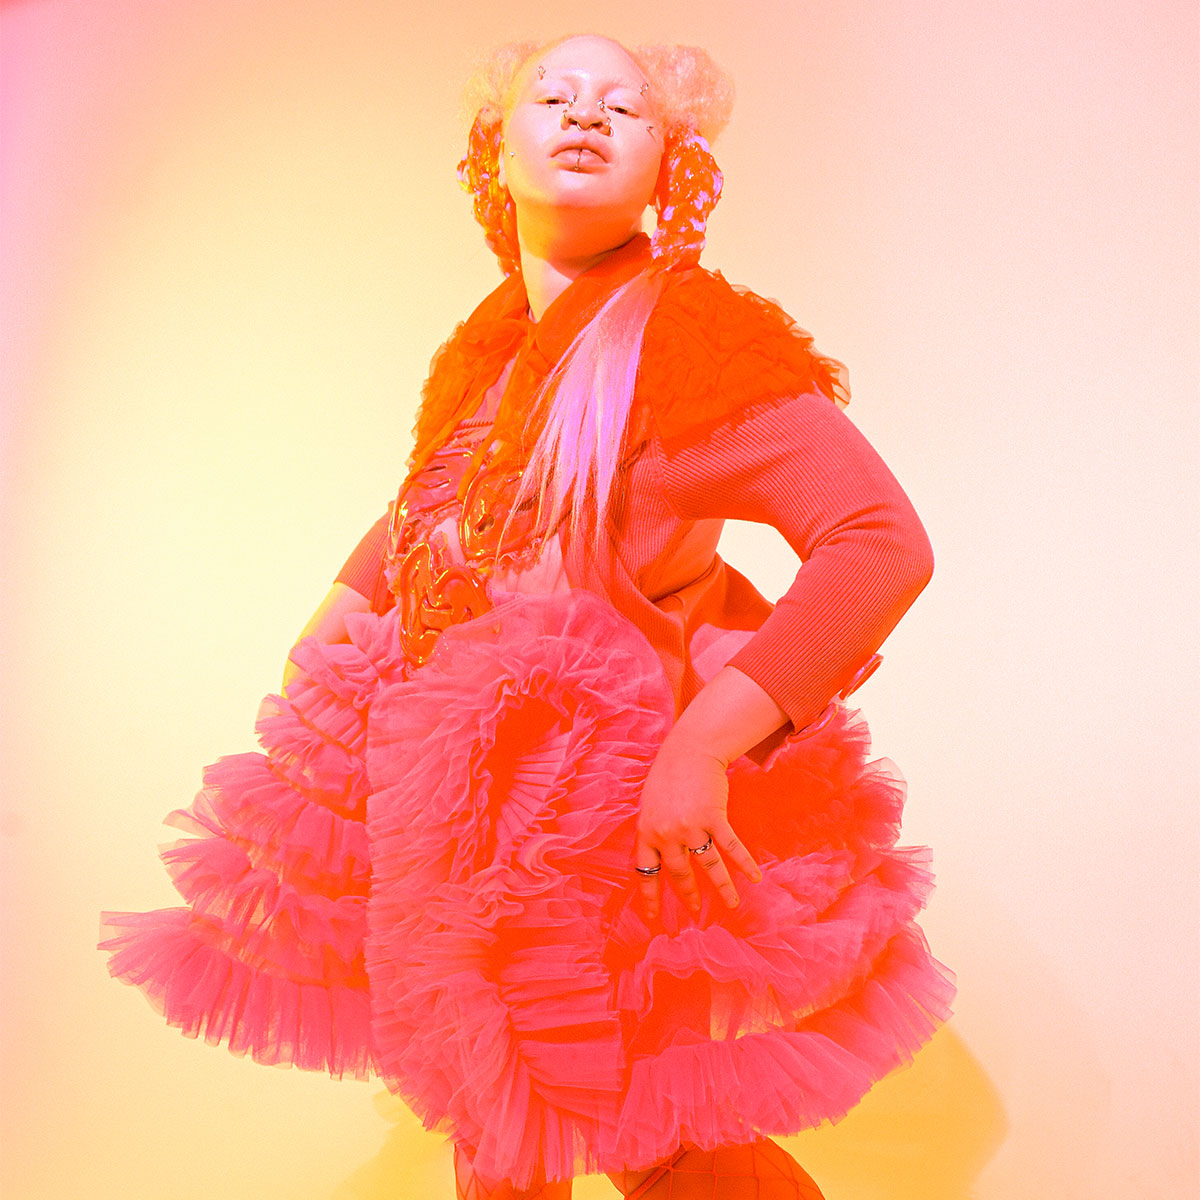 A model standing upright wearing a fluffy dress and shawl made of krinolin. The entire image is tinted red. 